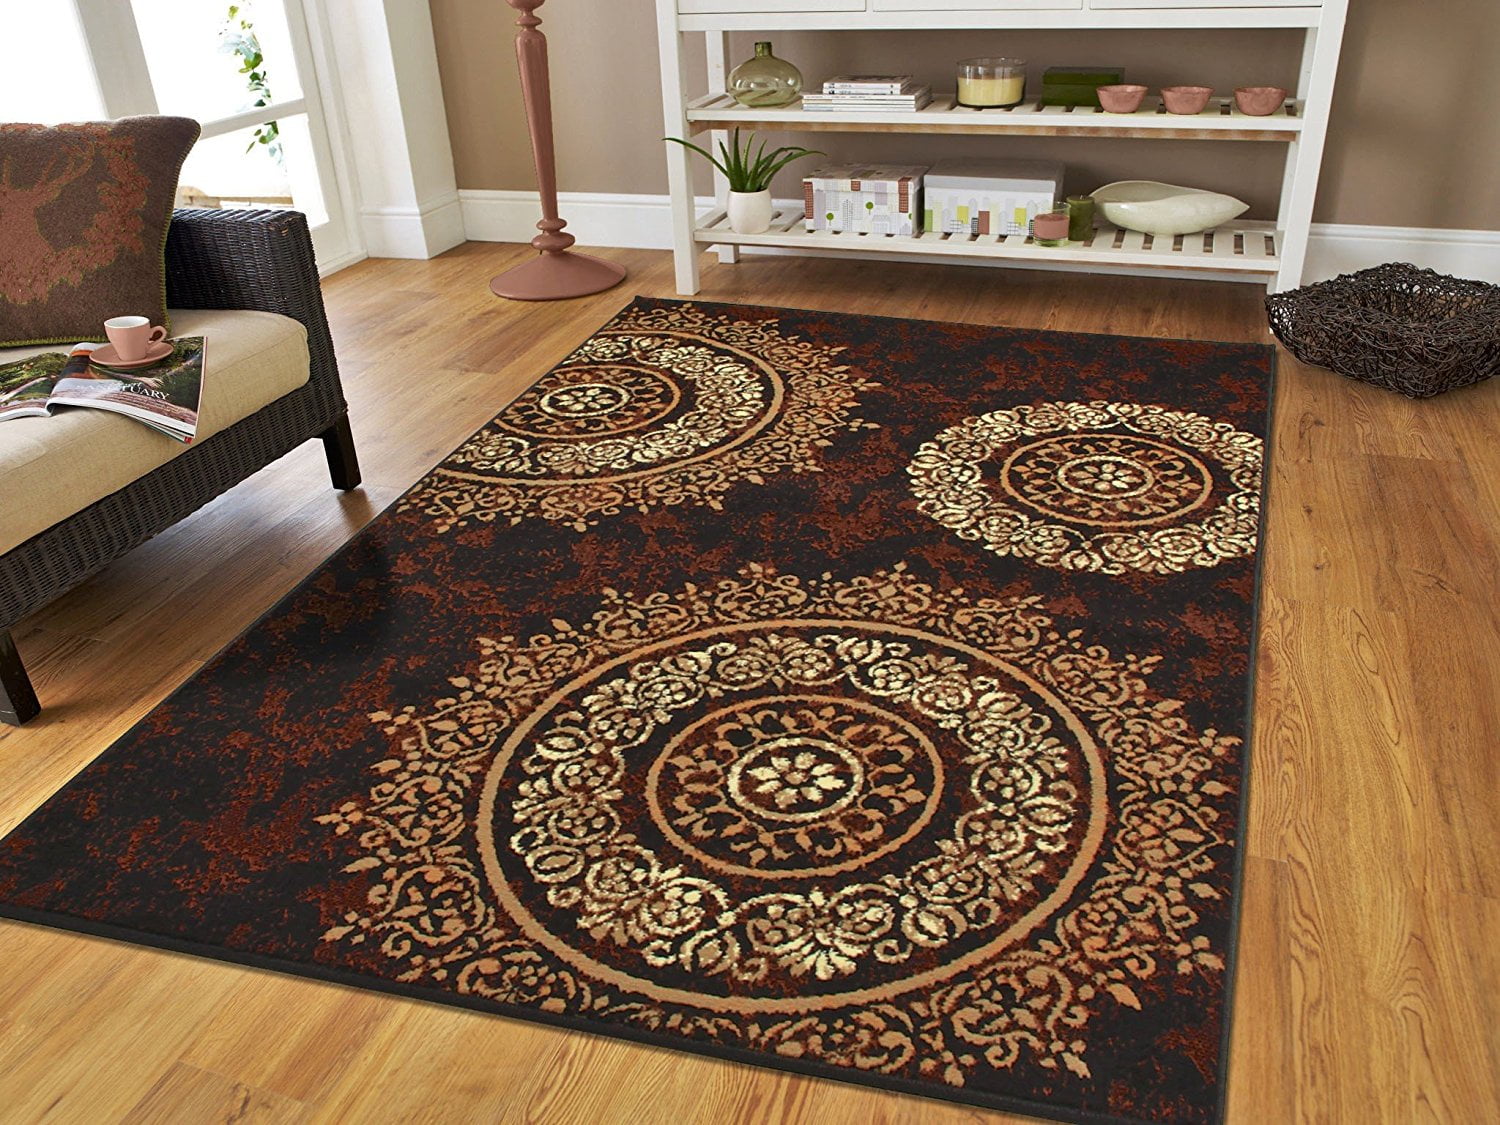 Ctemporary Area Rugs Large 8x11 Floor, Black And Brown Rug